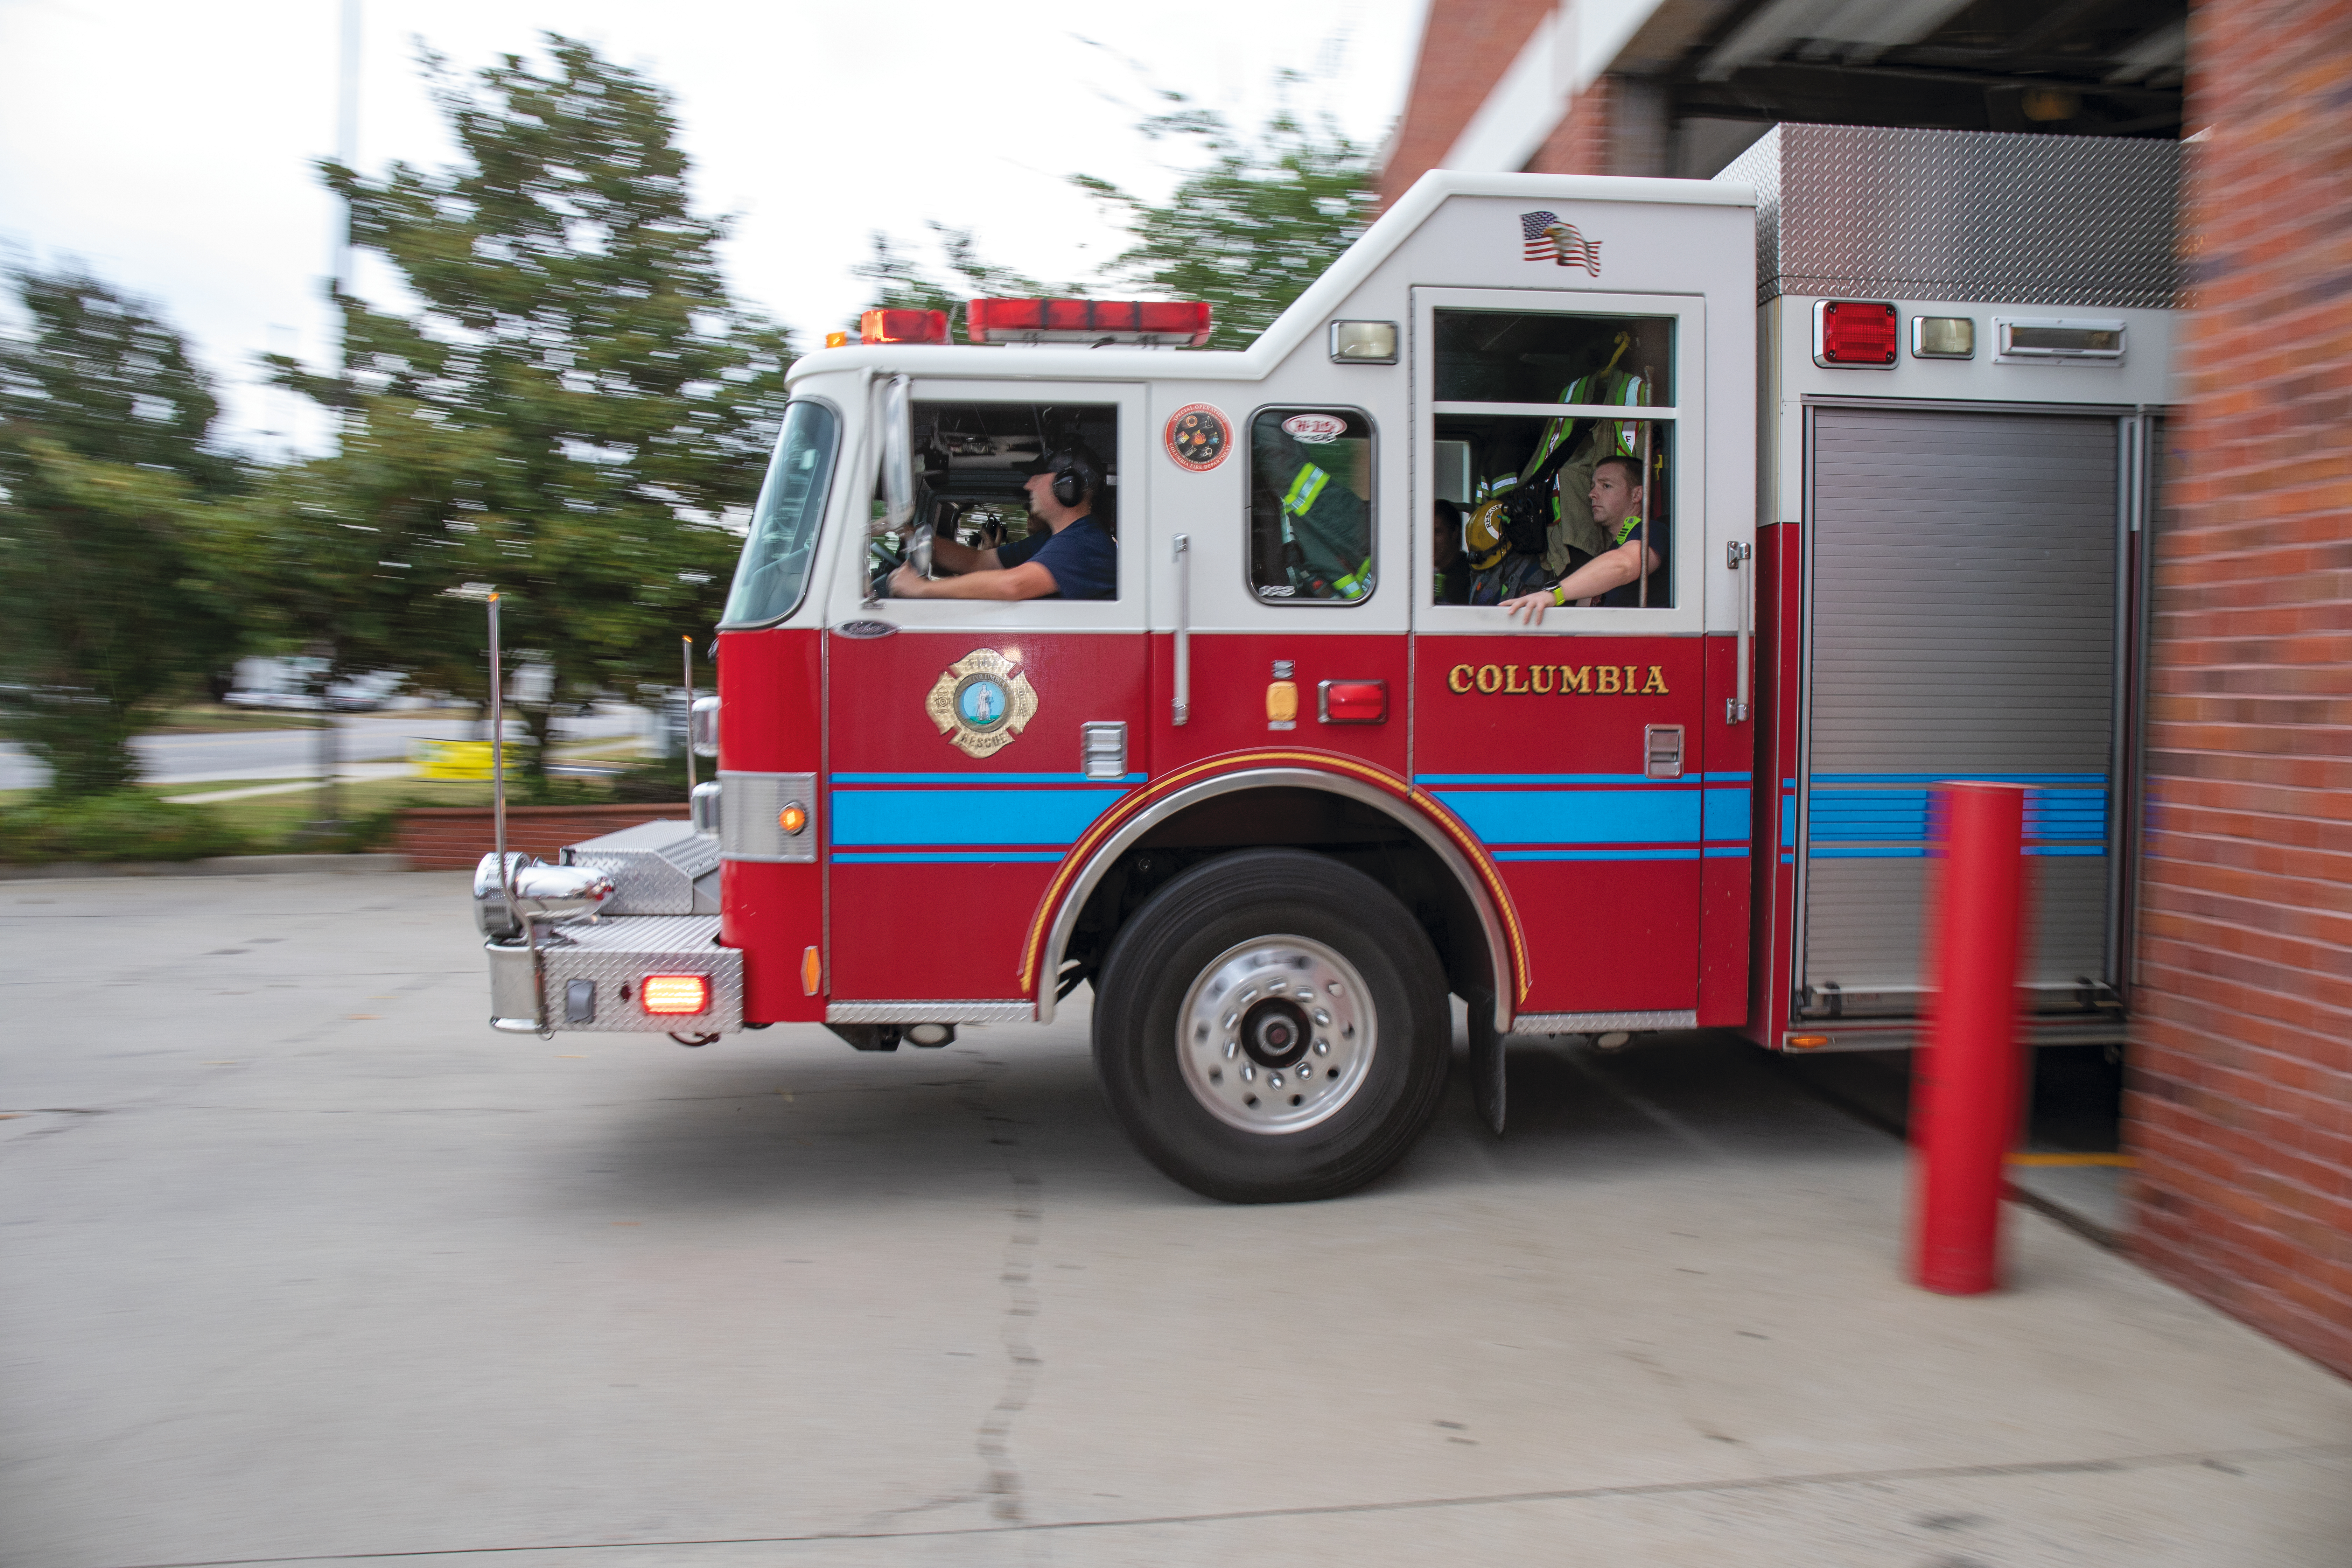 Rescue 1 rolling out in response to a call. Each year Rescue 1 is one of the busiest trucks in the department. In 2018, crews on Rescue 1 answered more than 2,500 calls for service.
